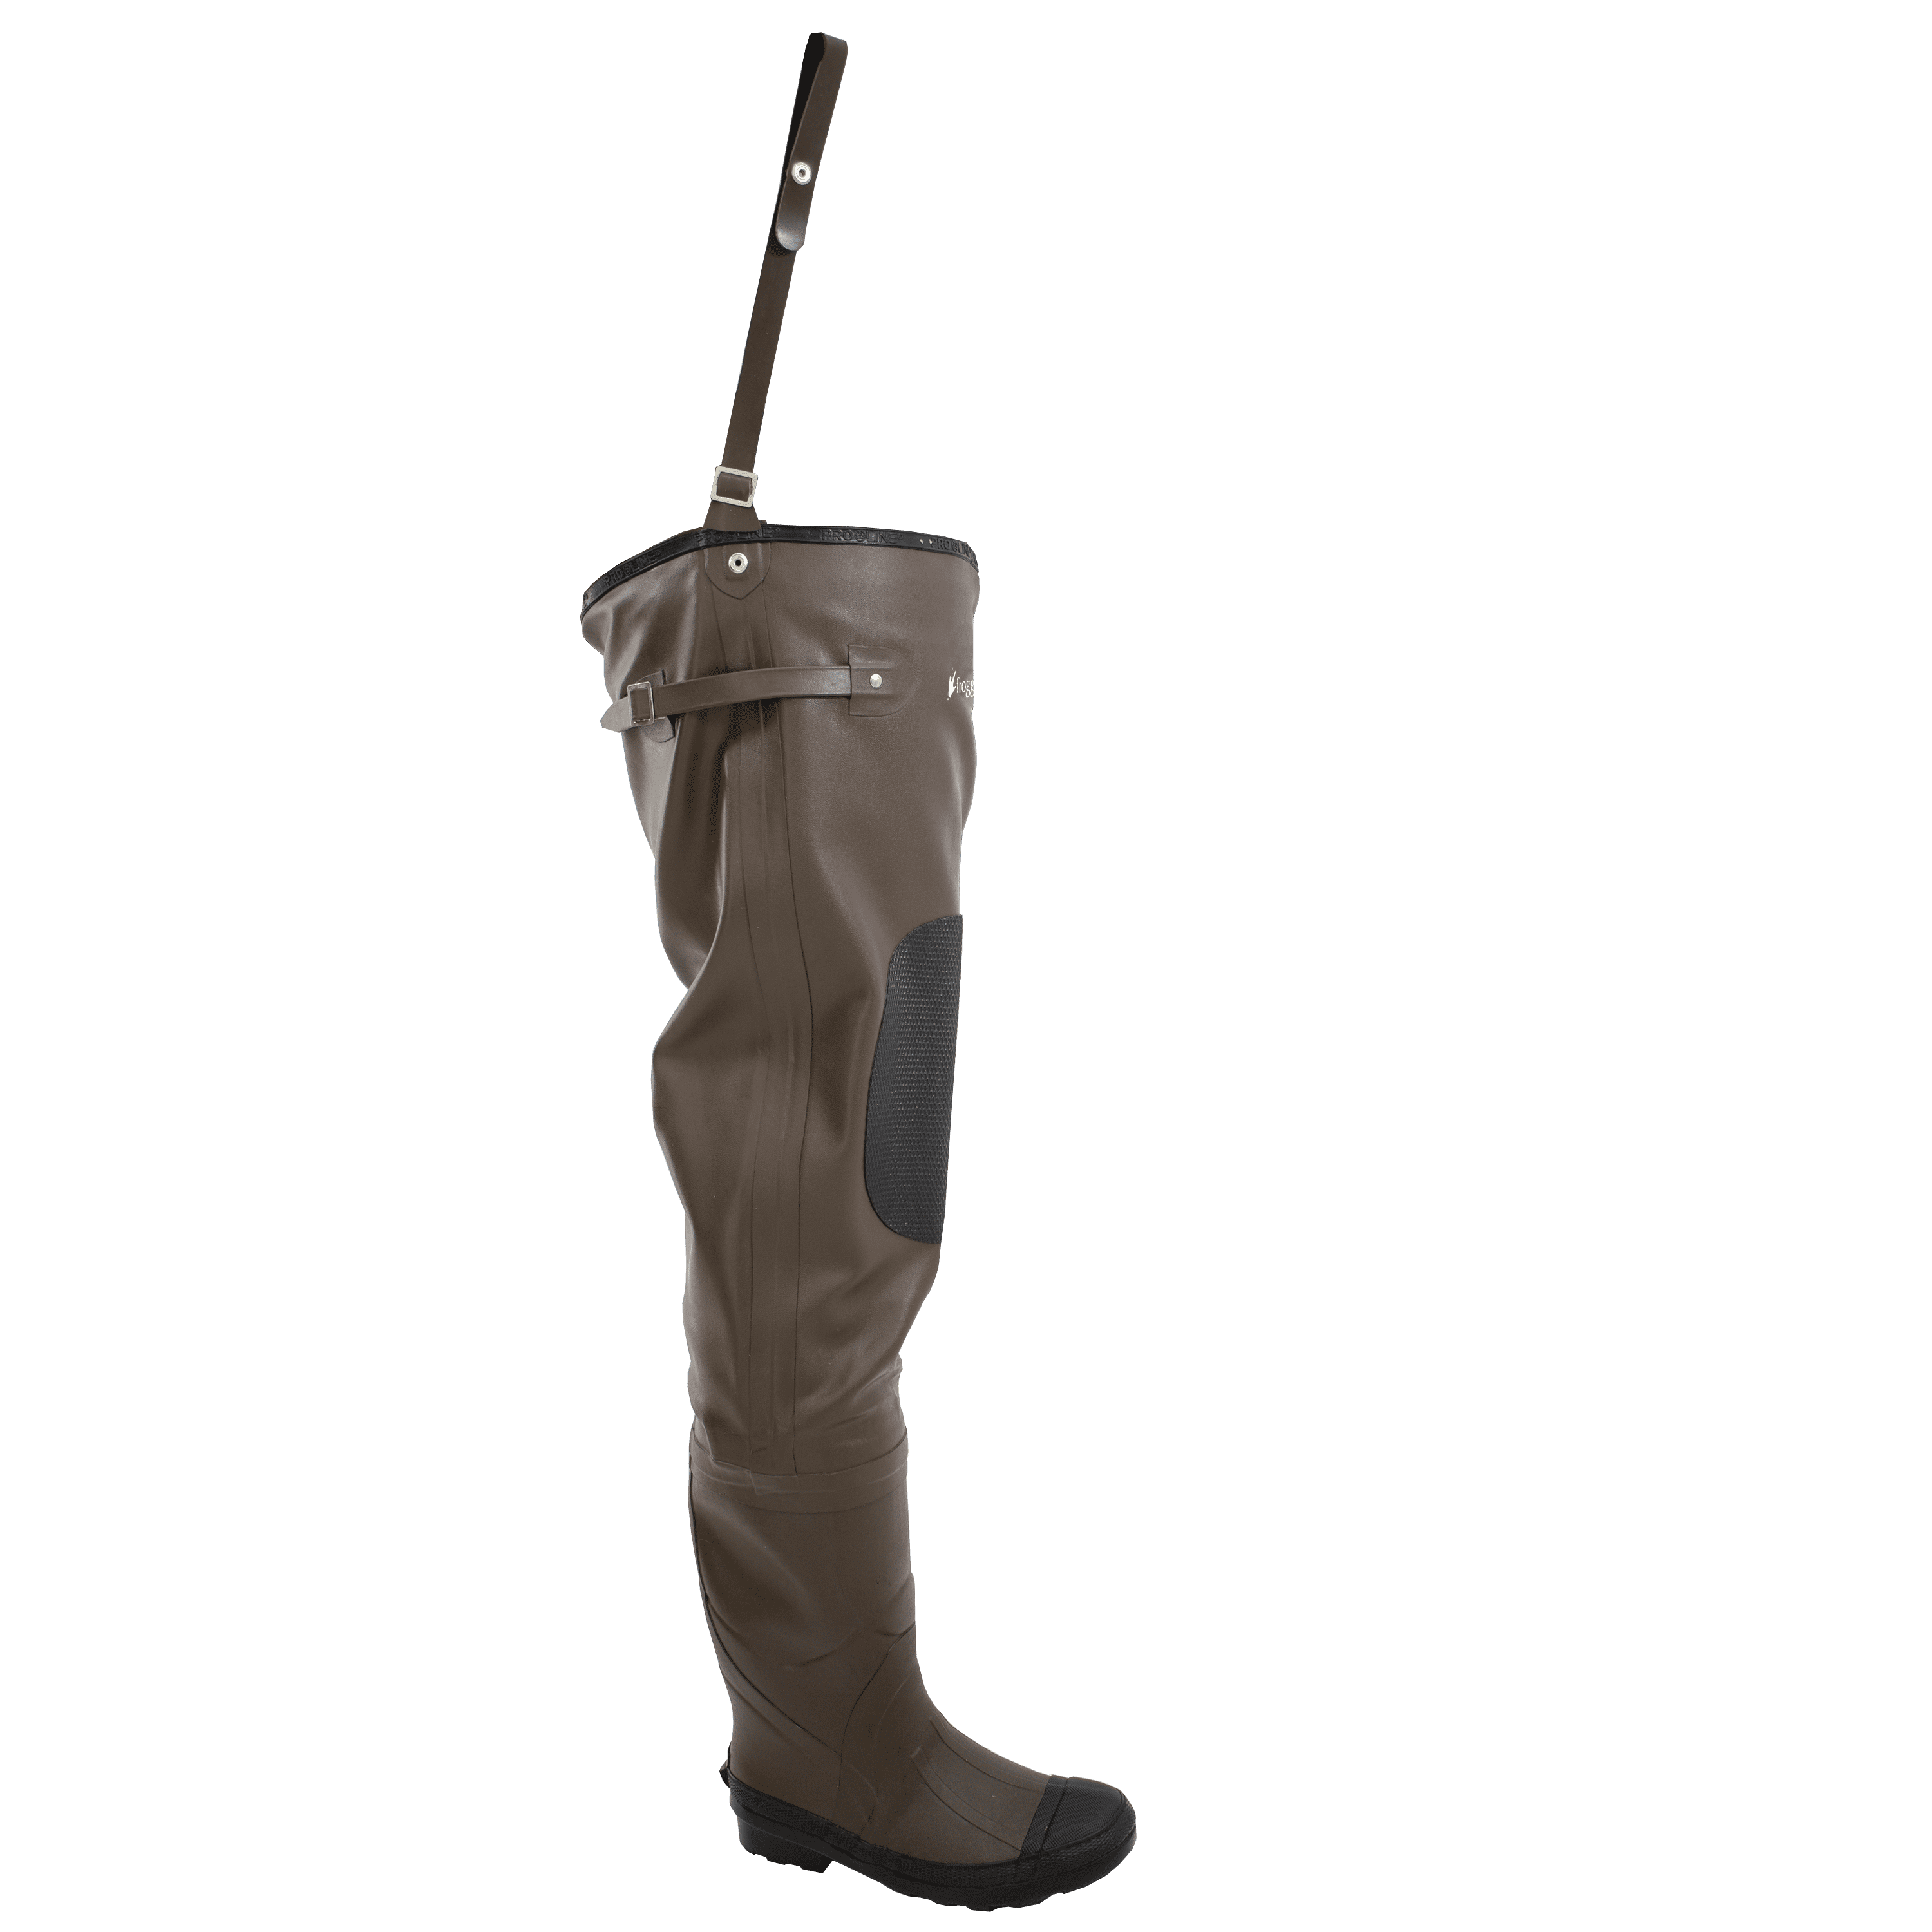 Frogg Toggs Classic II Hip Boot Cleated - Size 14 - Walmart.com.